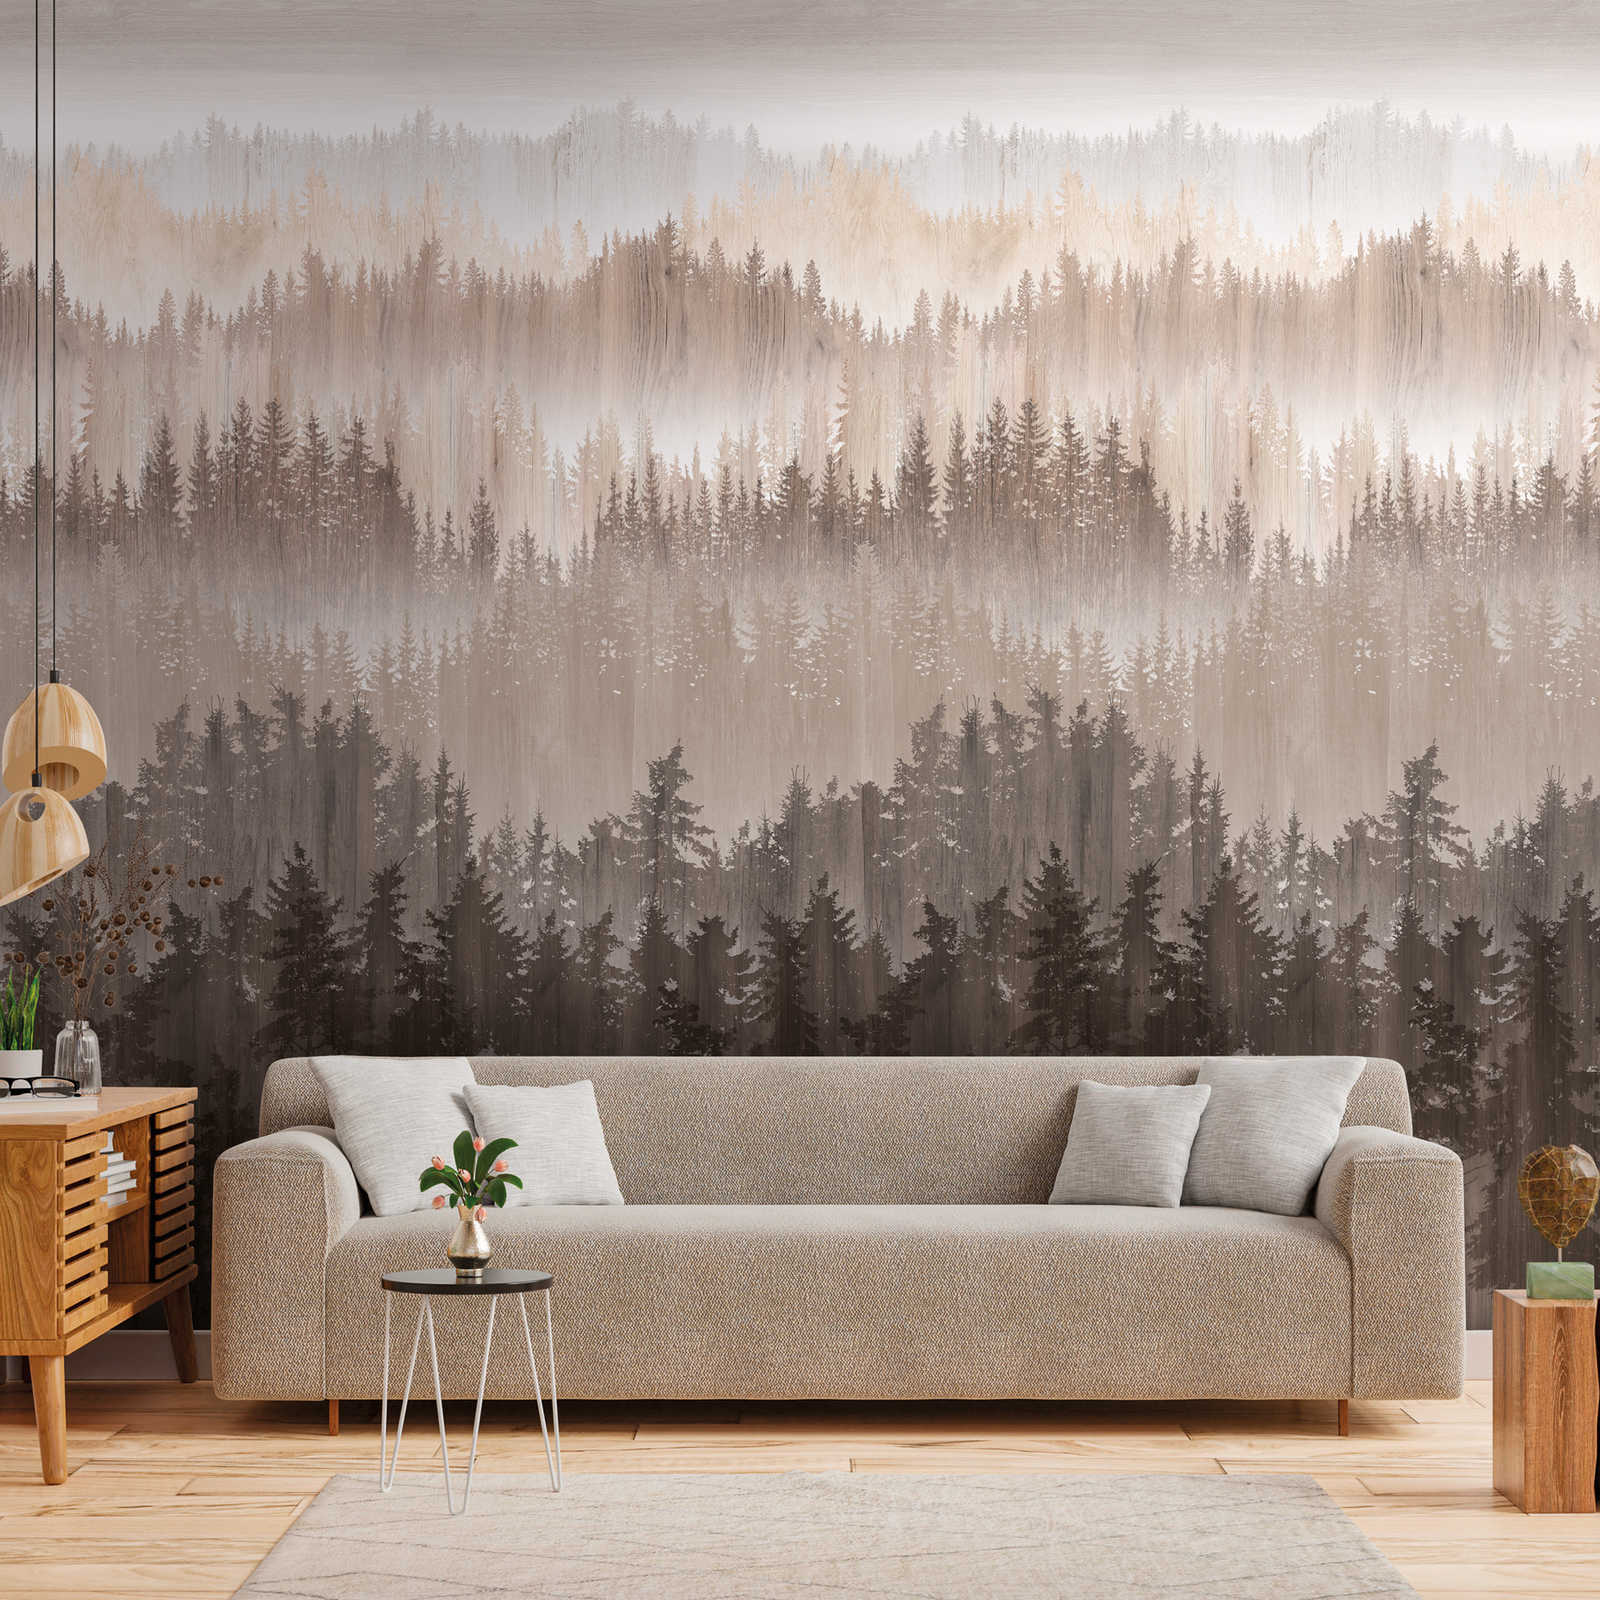         Non-woven wallpaper with suggested forest pattern - brown, beige, cream
    